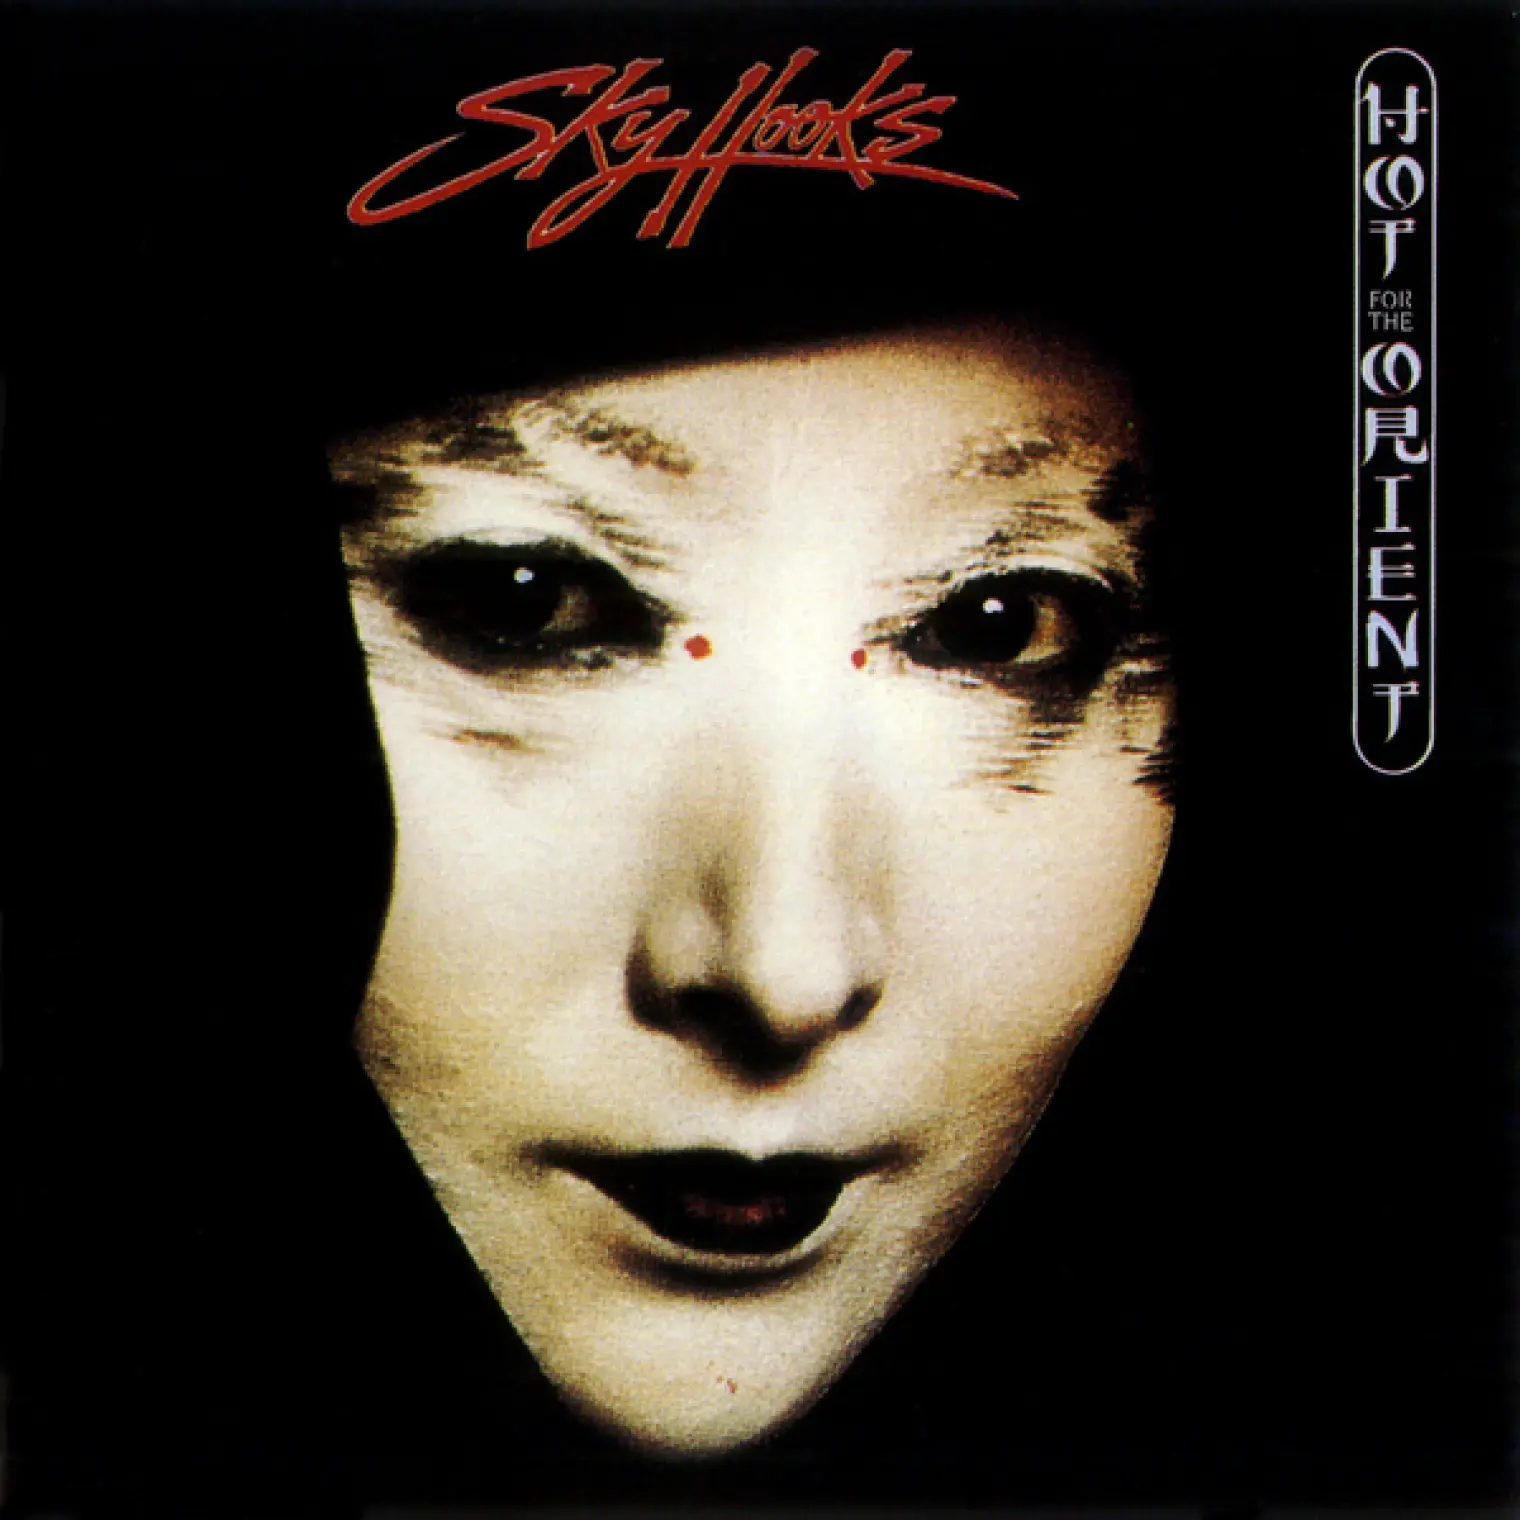 Hot For The Orient [remastered] -  Skyhooks 